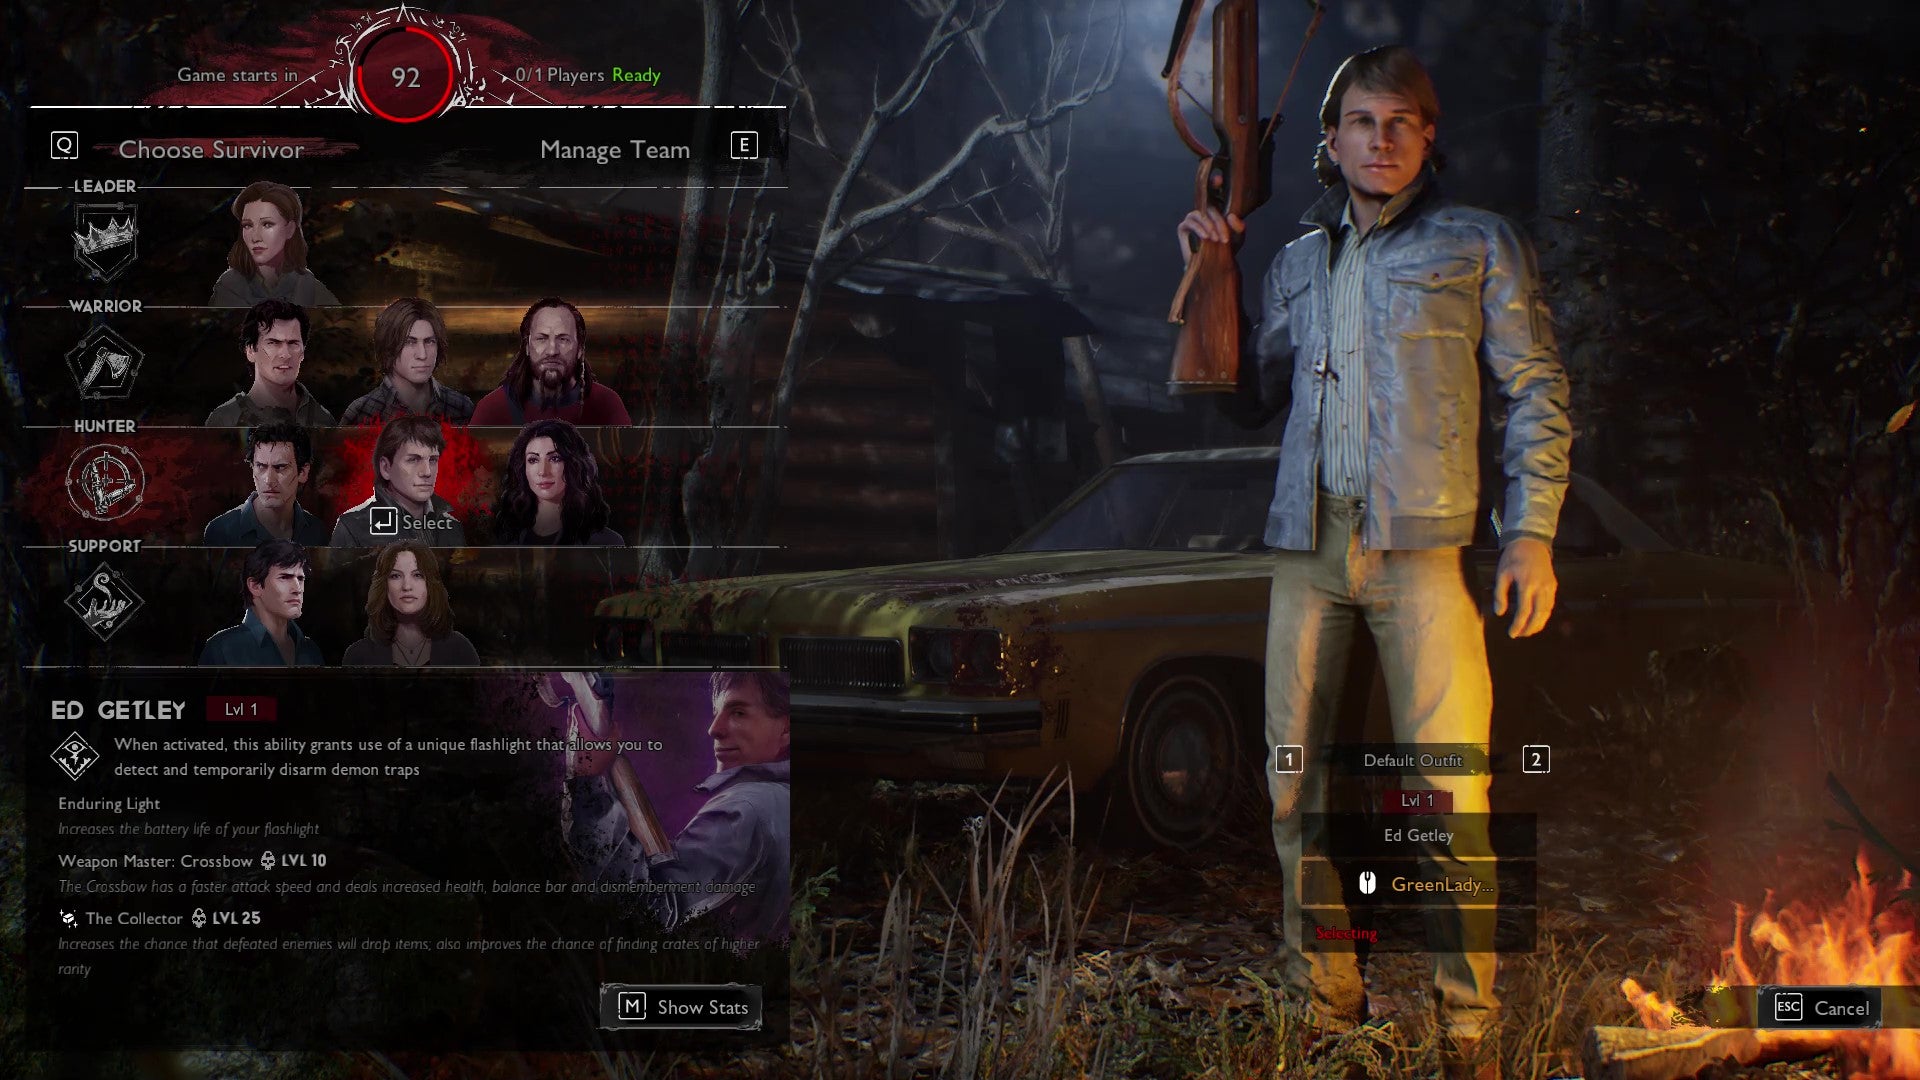 The player selection screen from Evil Dead: The Game, with Ed Getley selected by a Survivor player.